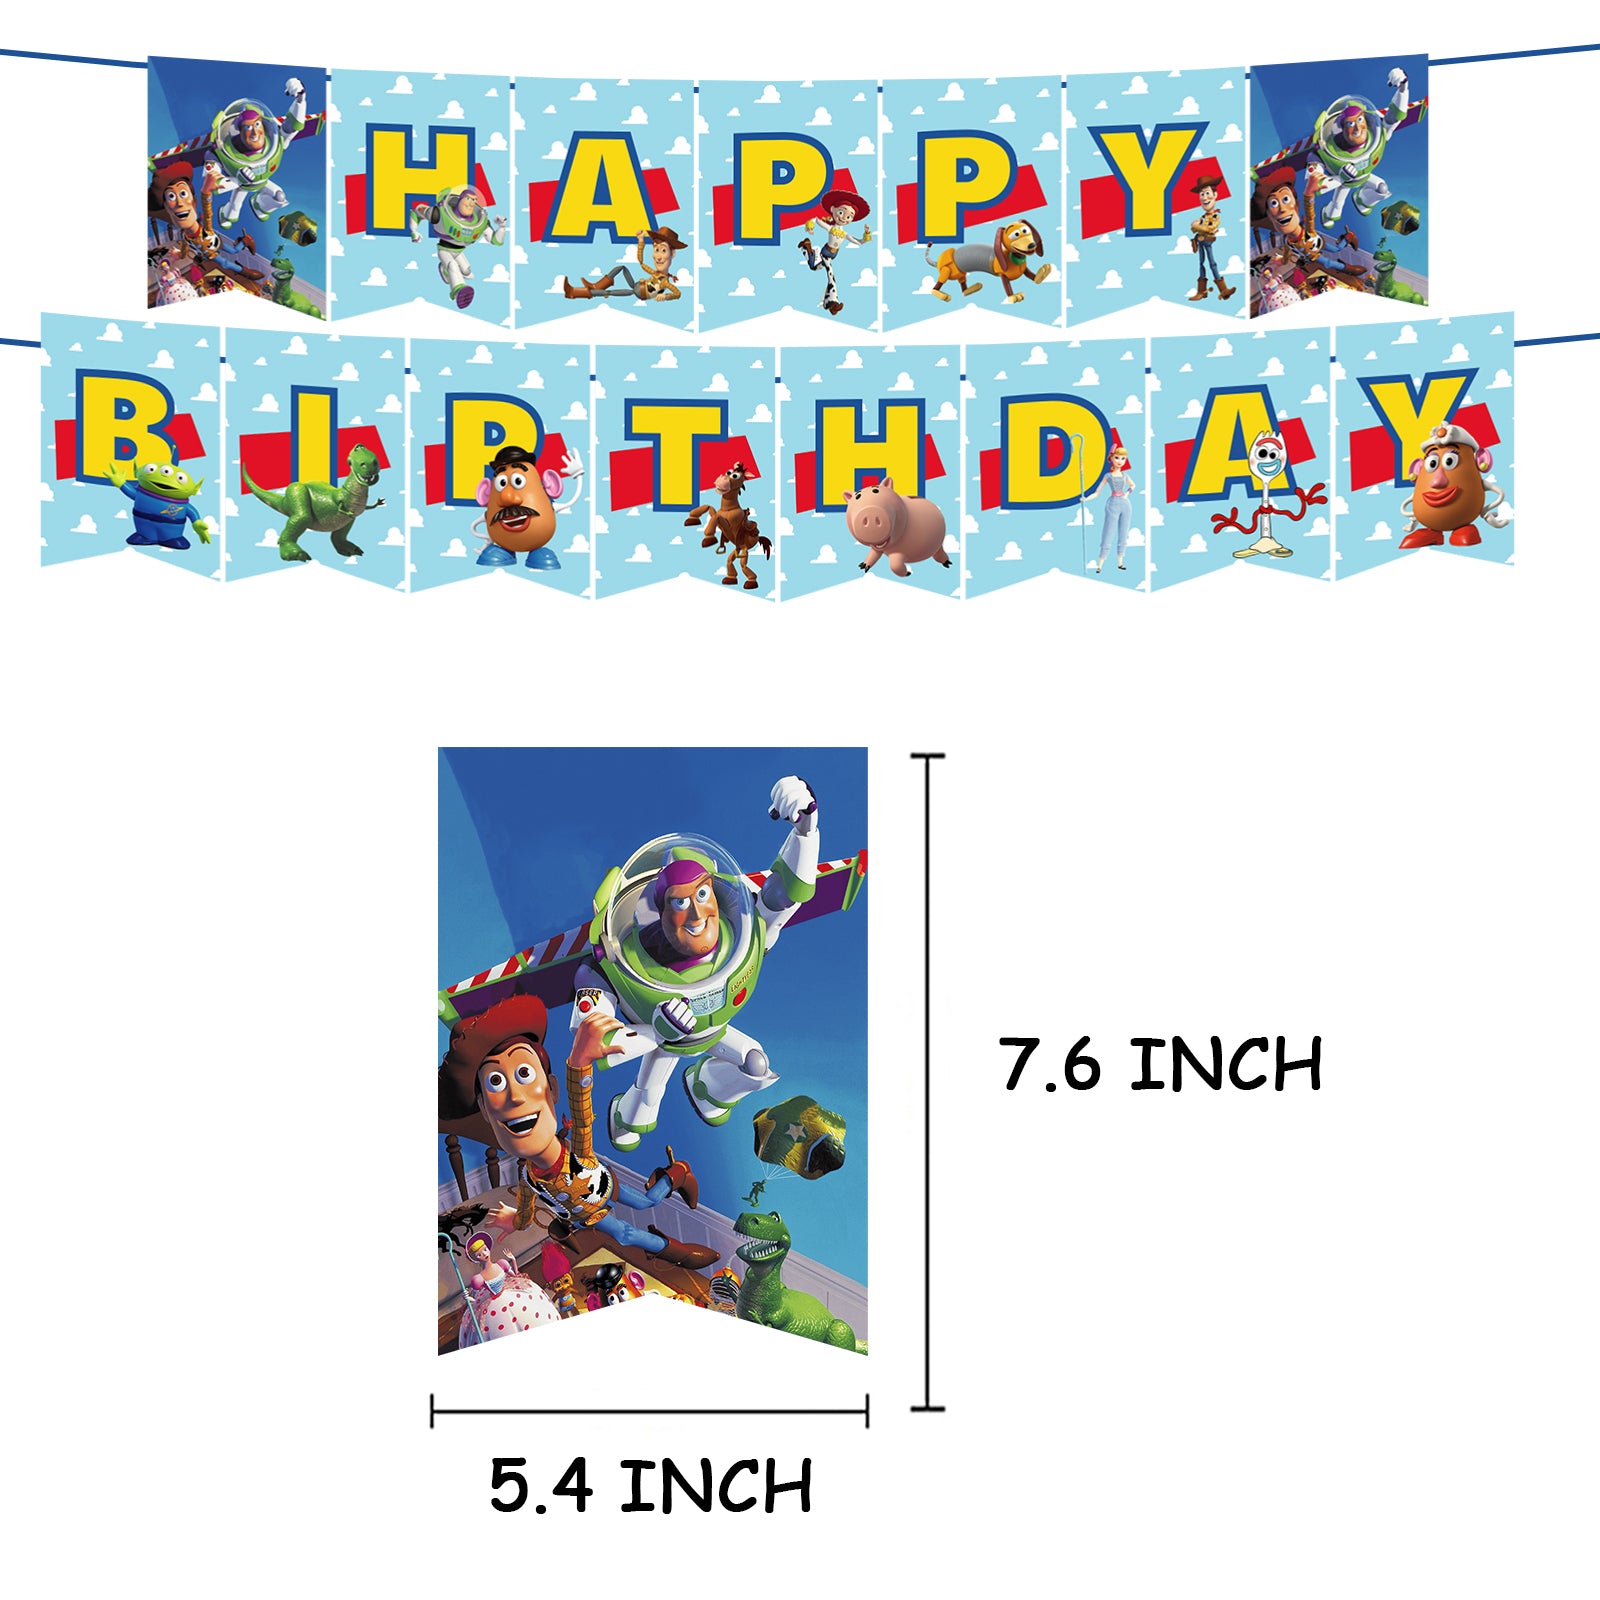 Toy Story Birthday Party Decorations.